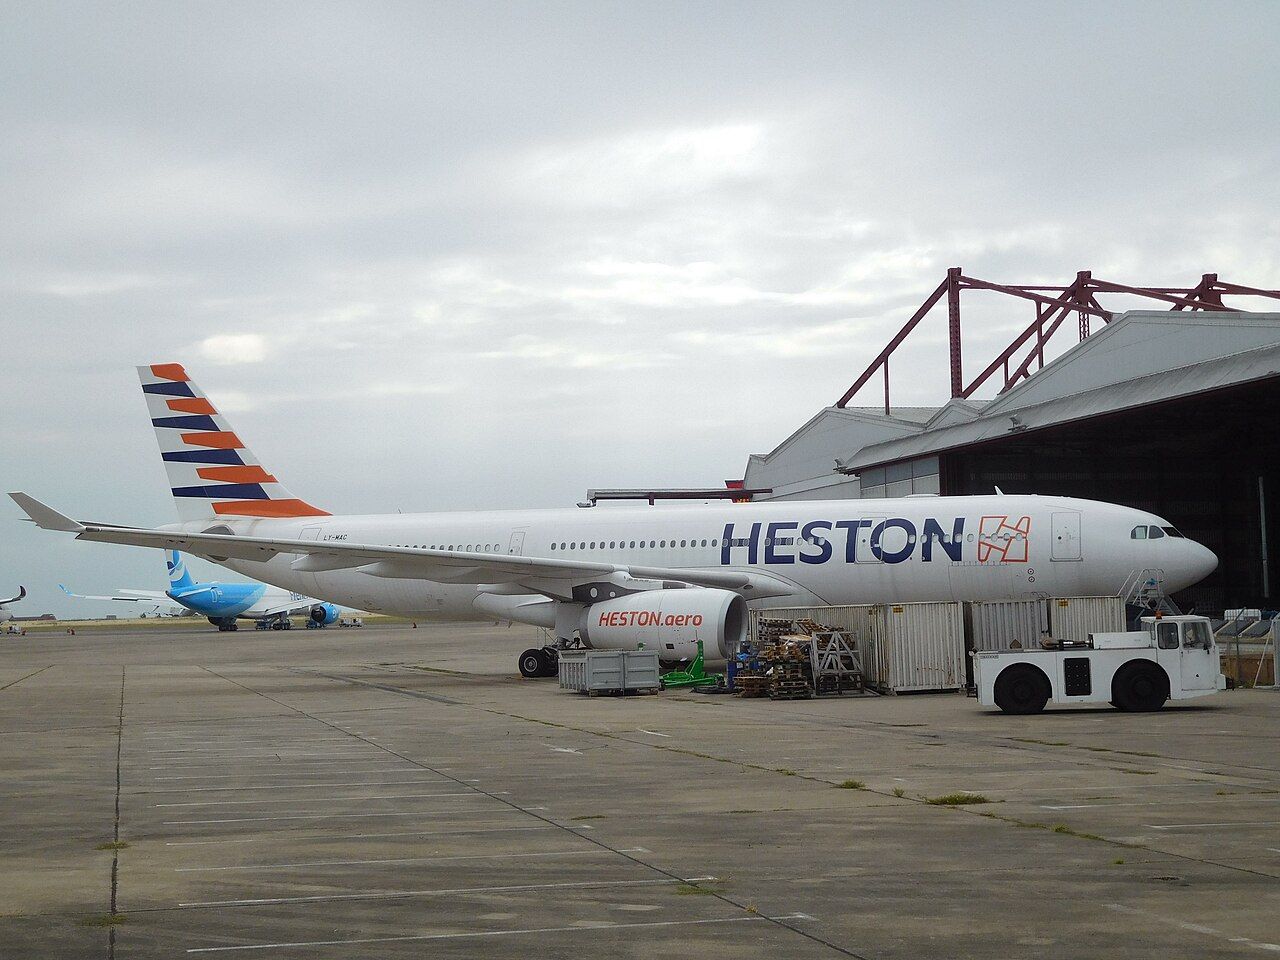 A Heston Airbus A330 parked at an airport.